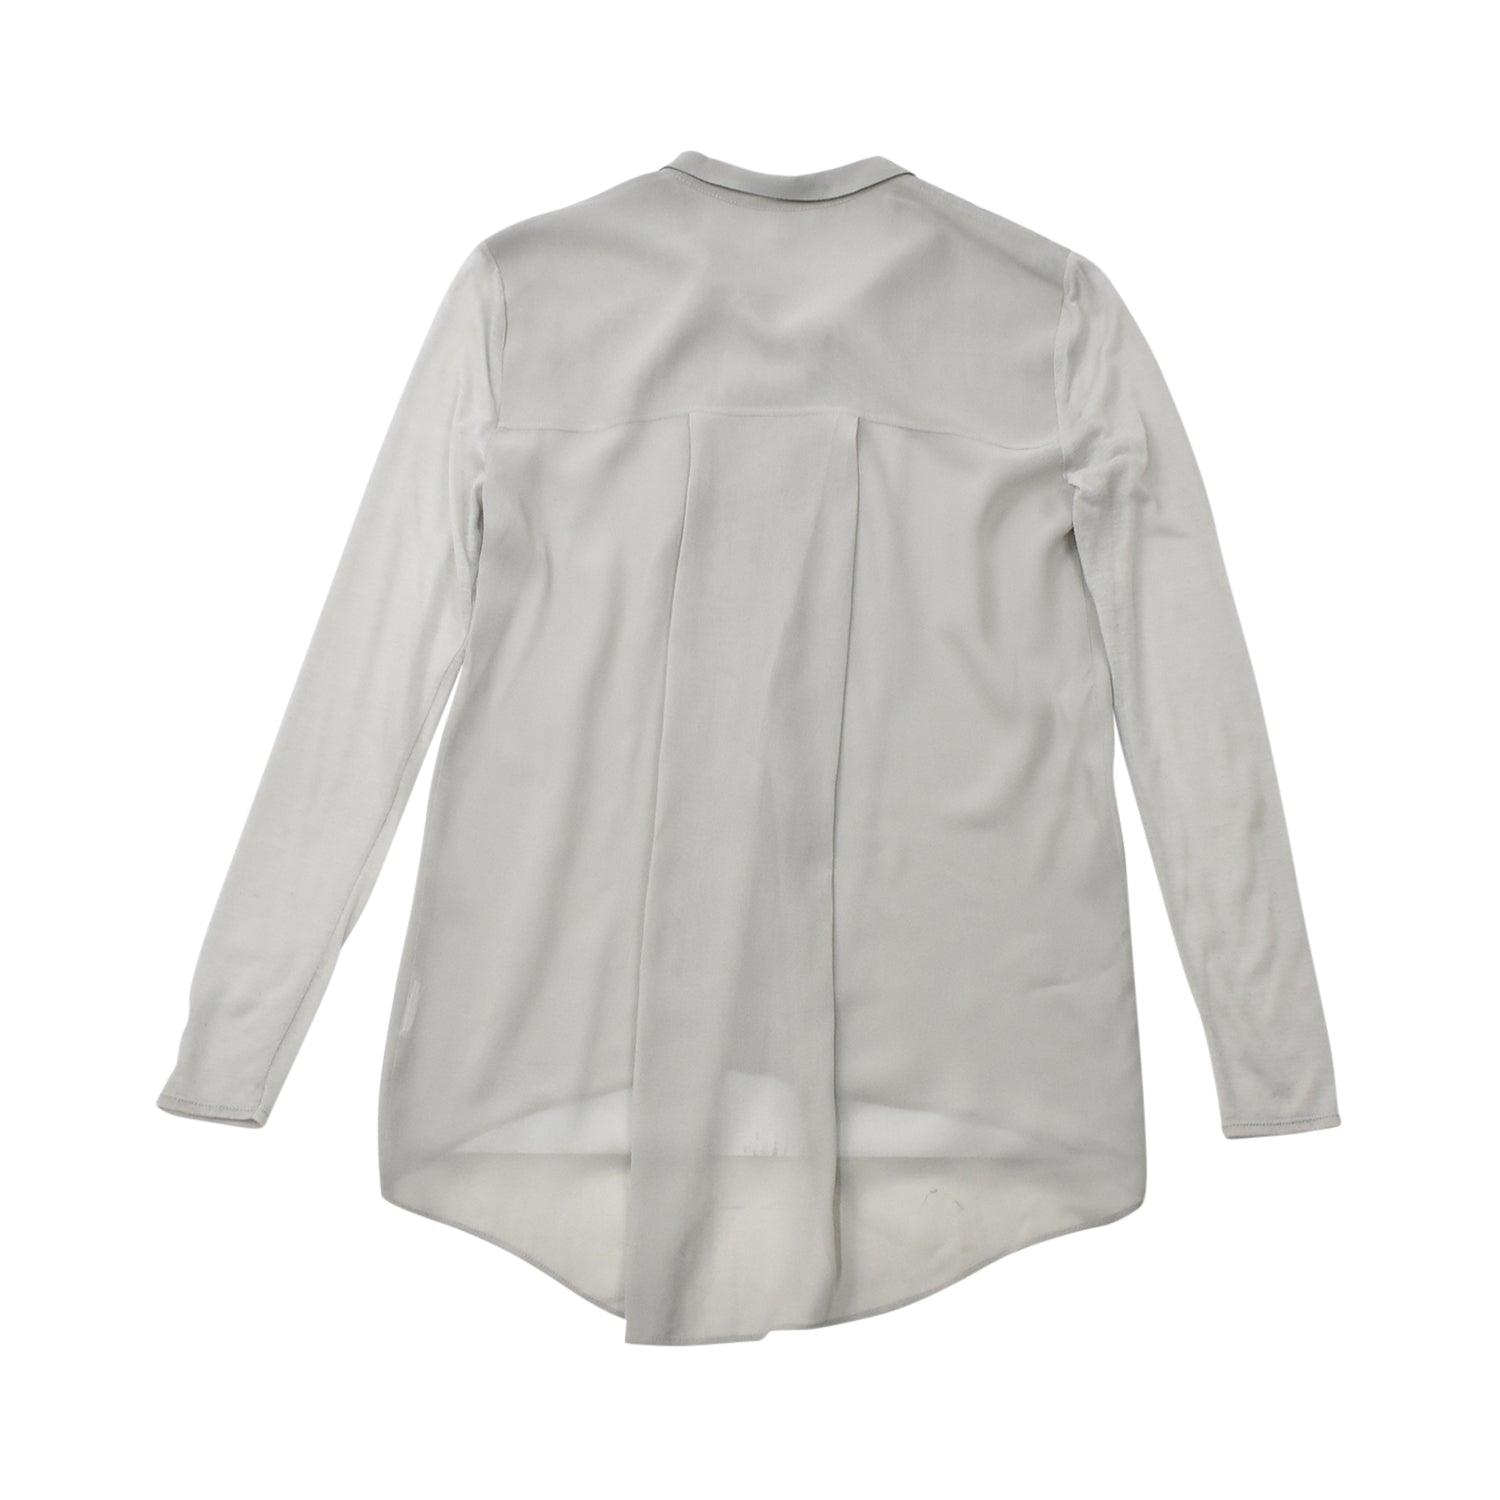 Helmut by Helmut Lang Blouse - Women's Petite - Fashionably Yours